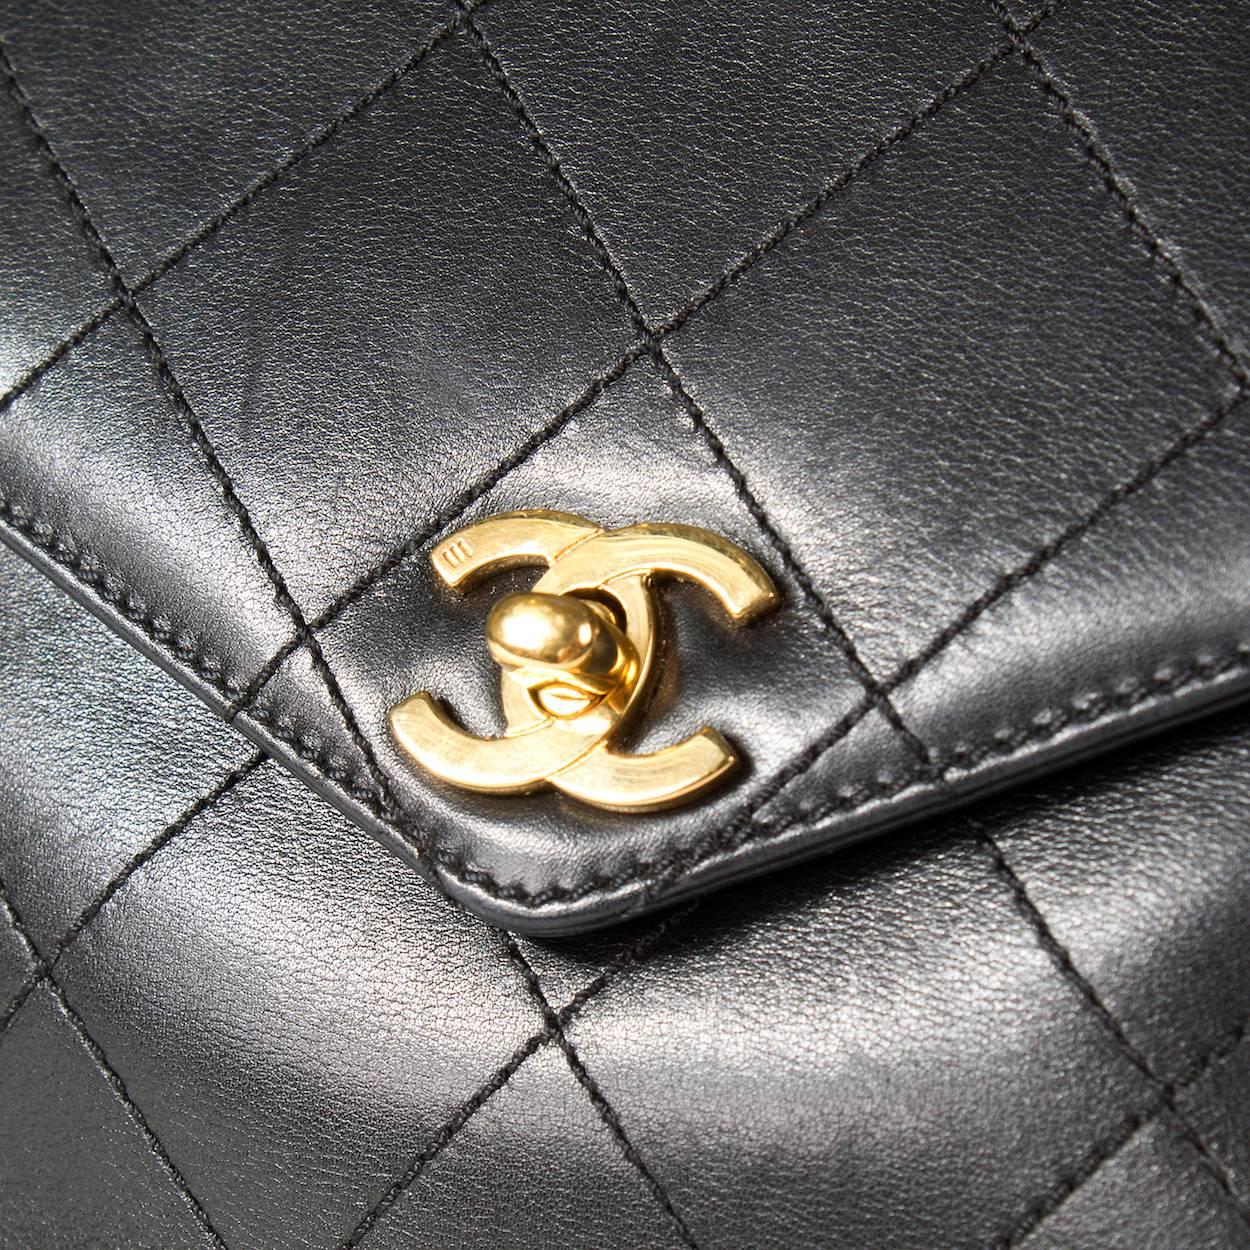 Women's Chanel Quilted Black Leather Bag